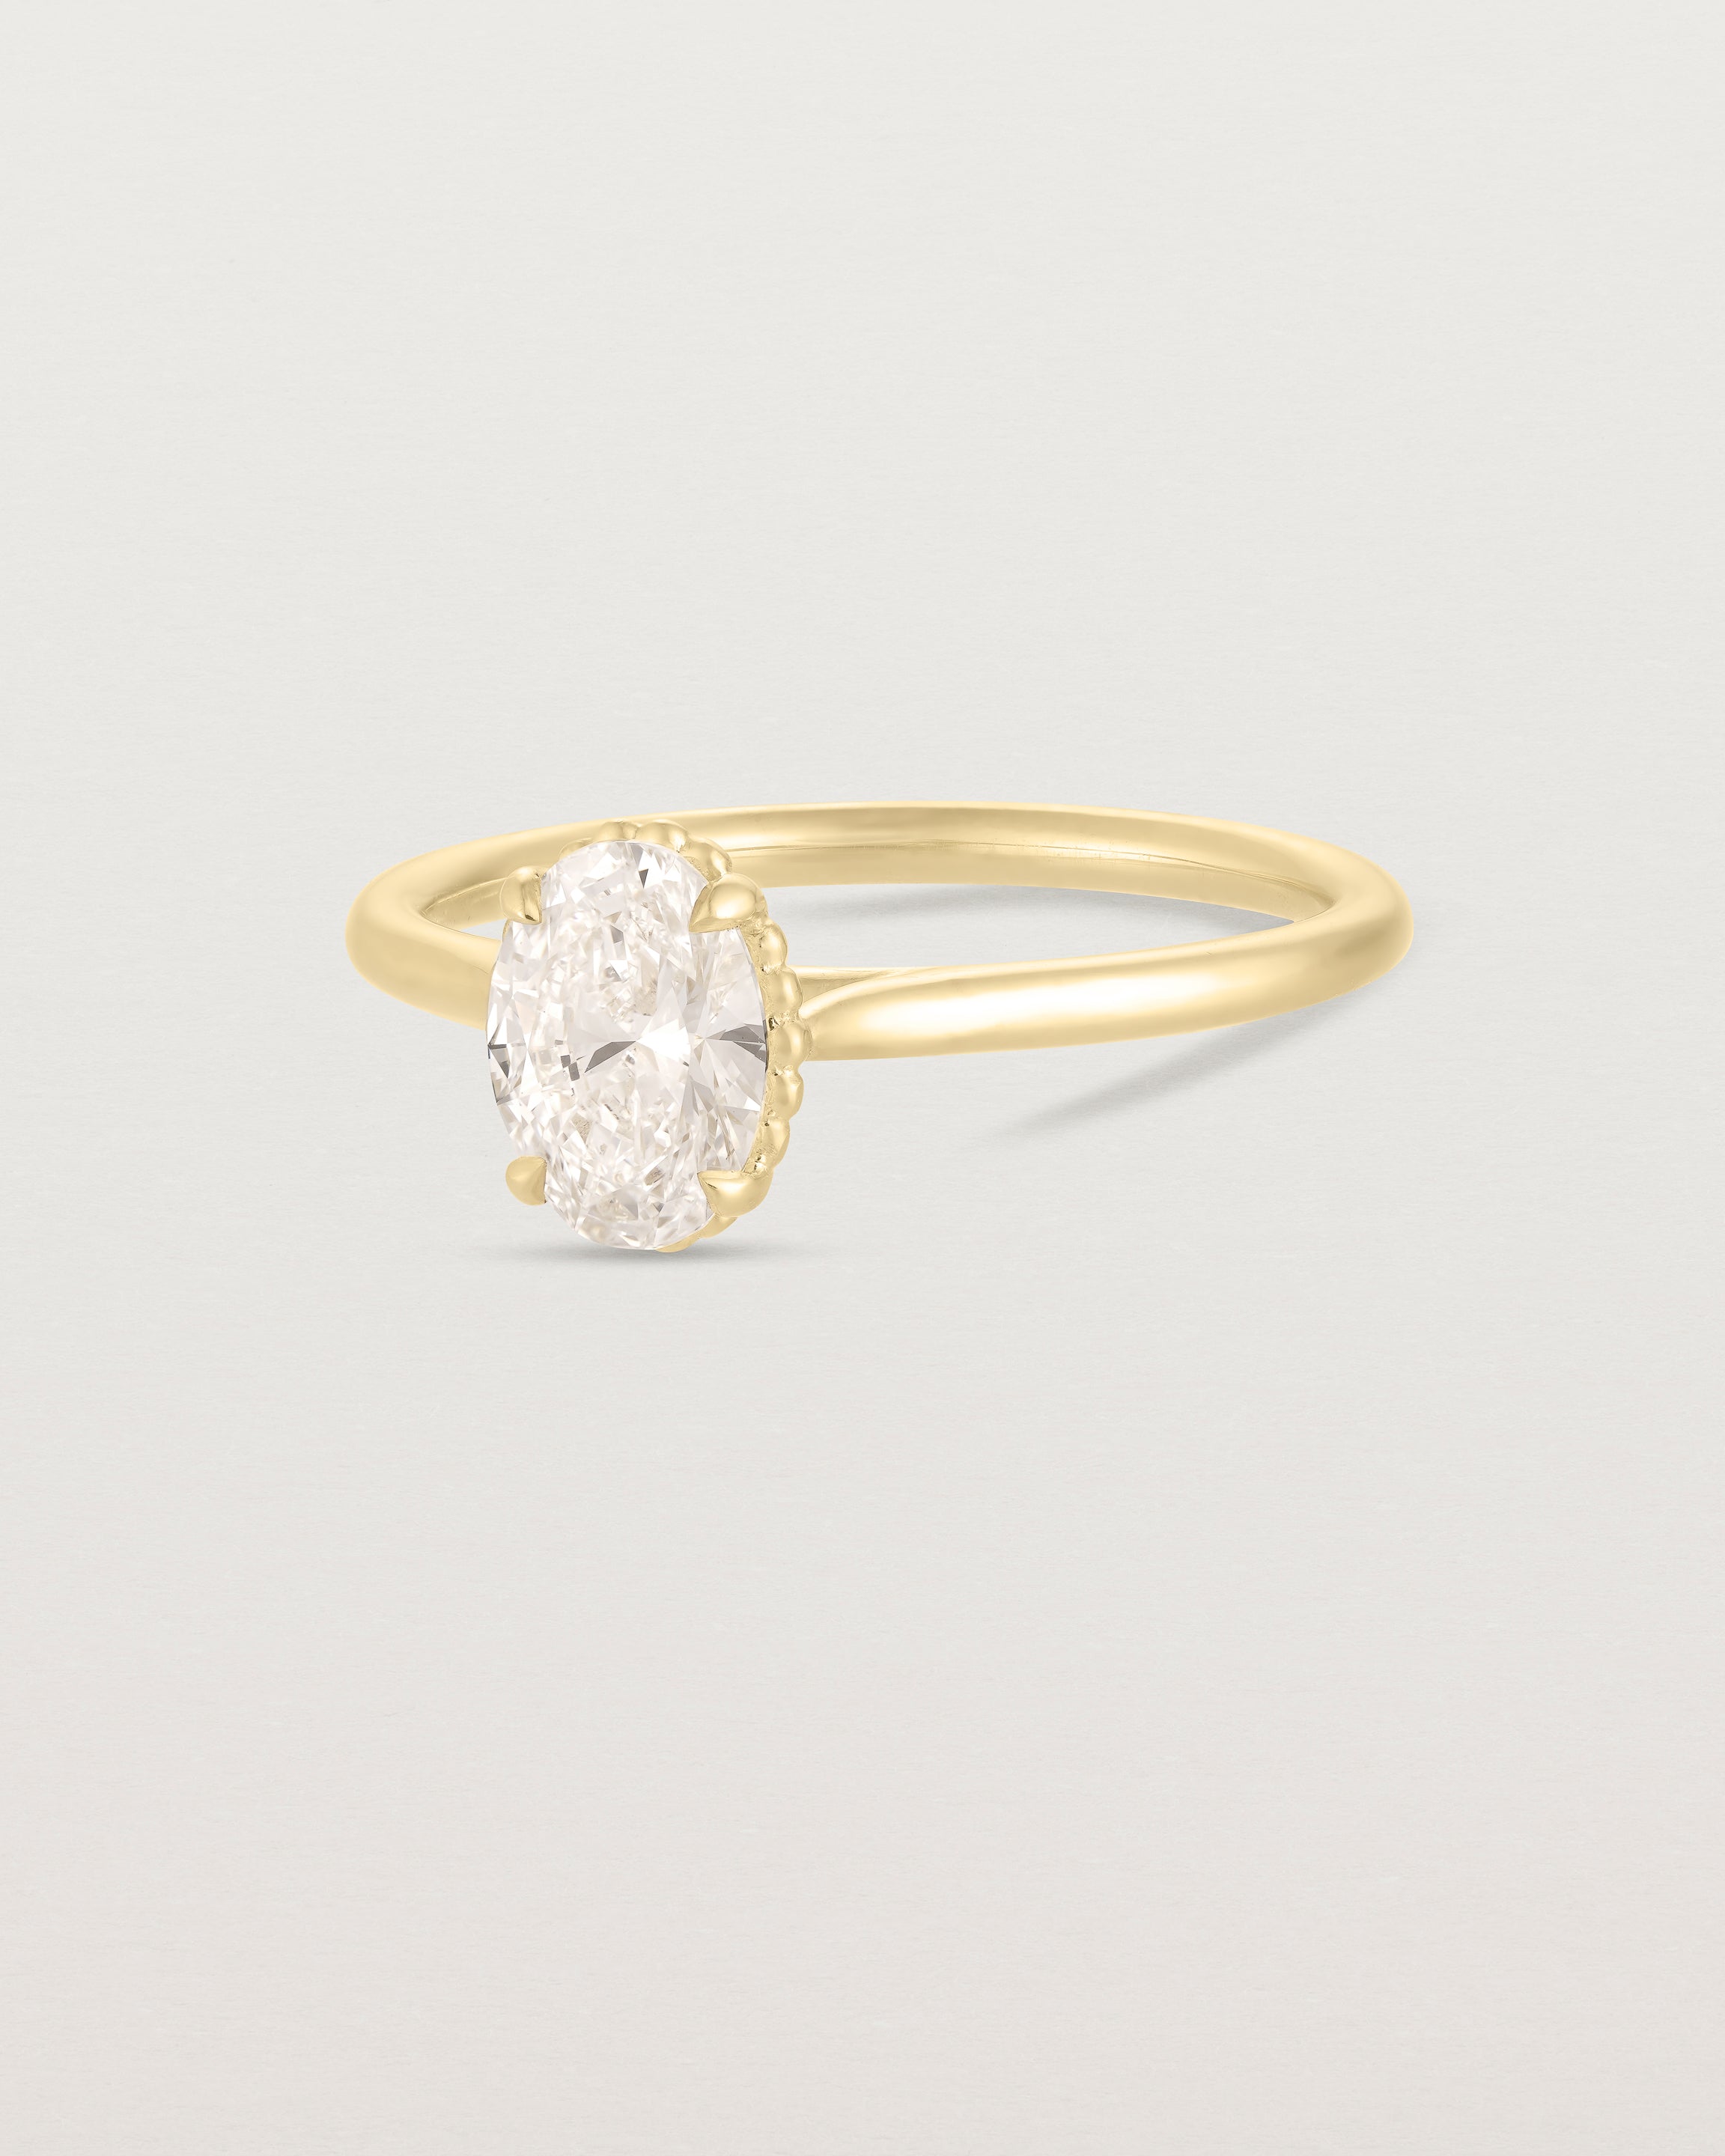 A side view of the Thea Oval Solitaire with Laboratory Grown Diamond